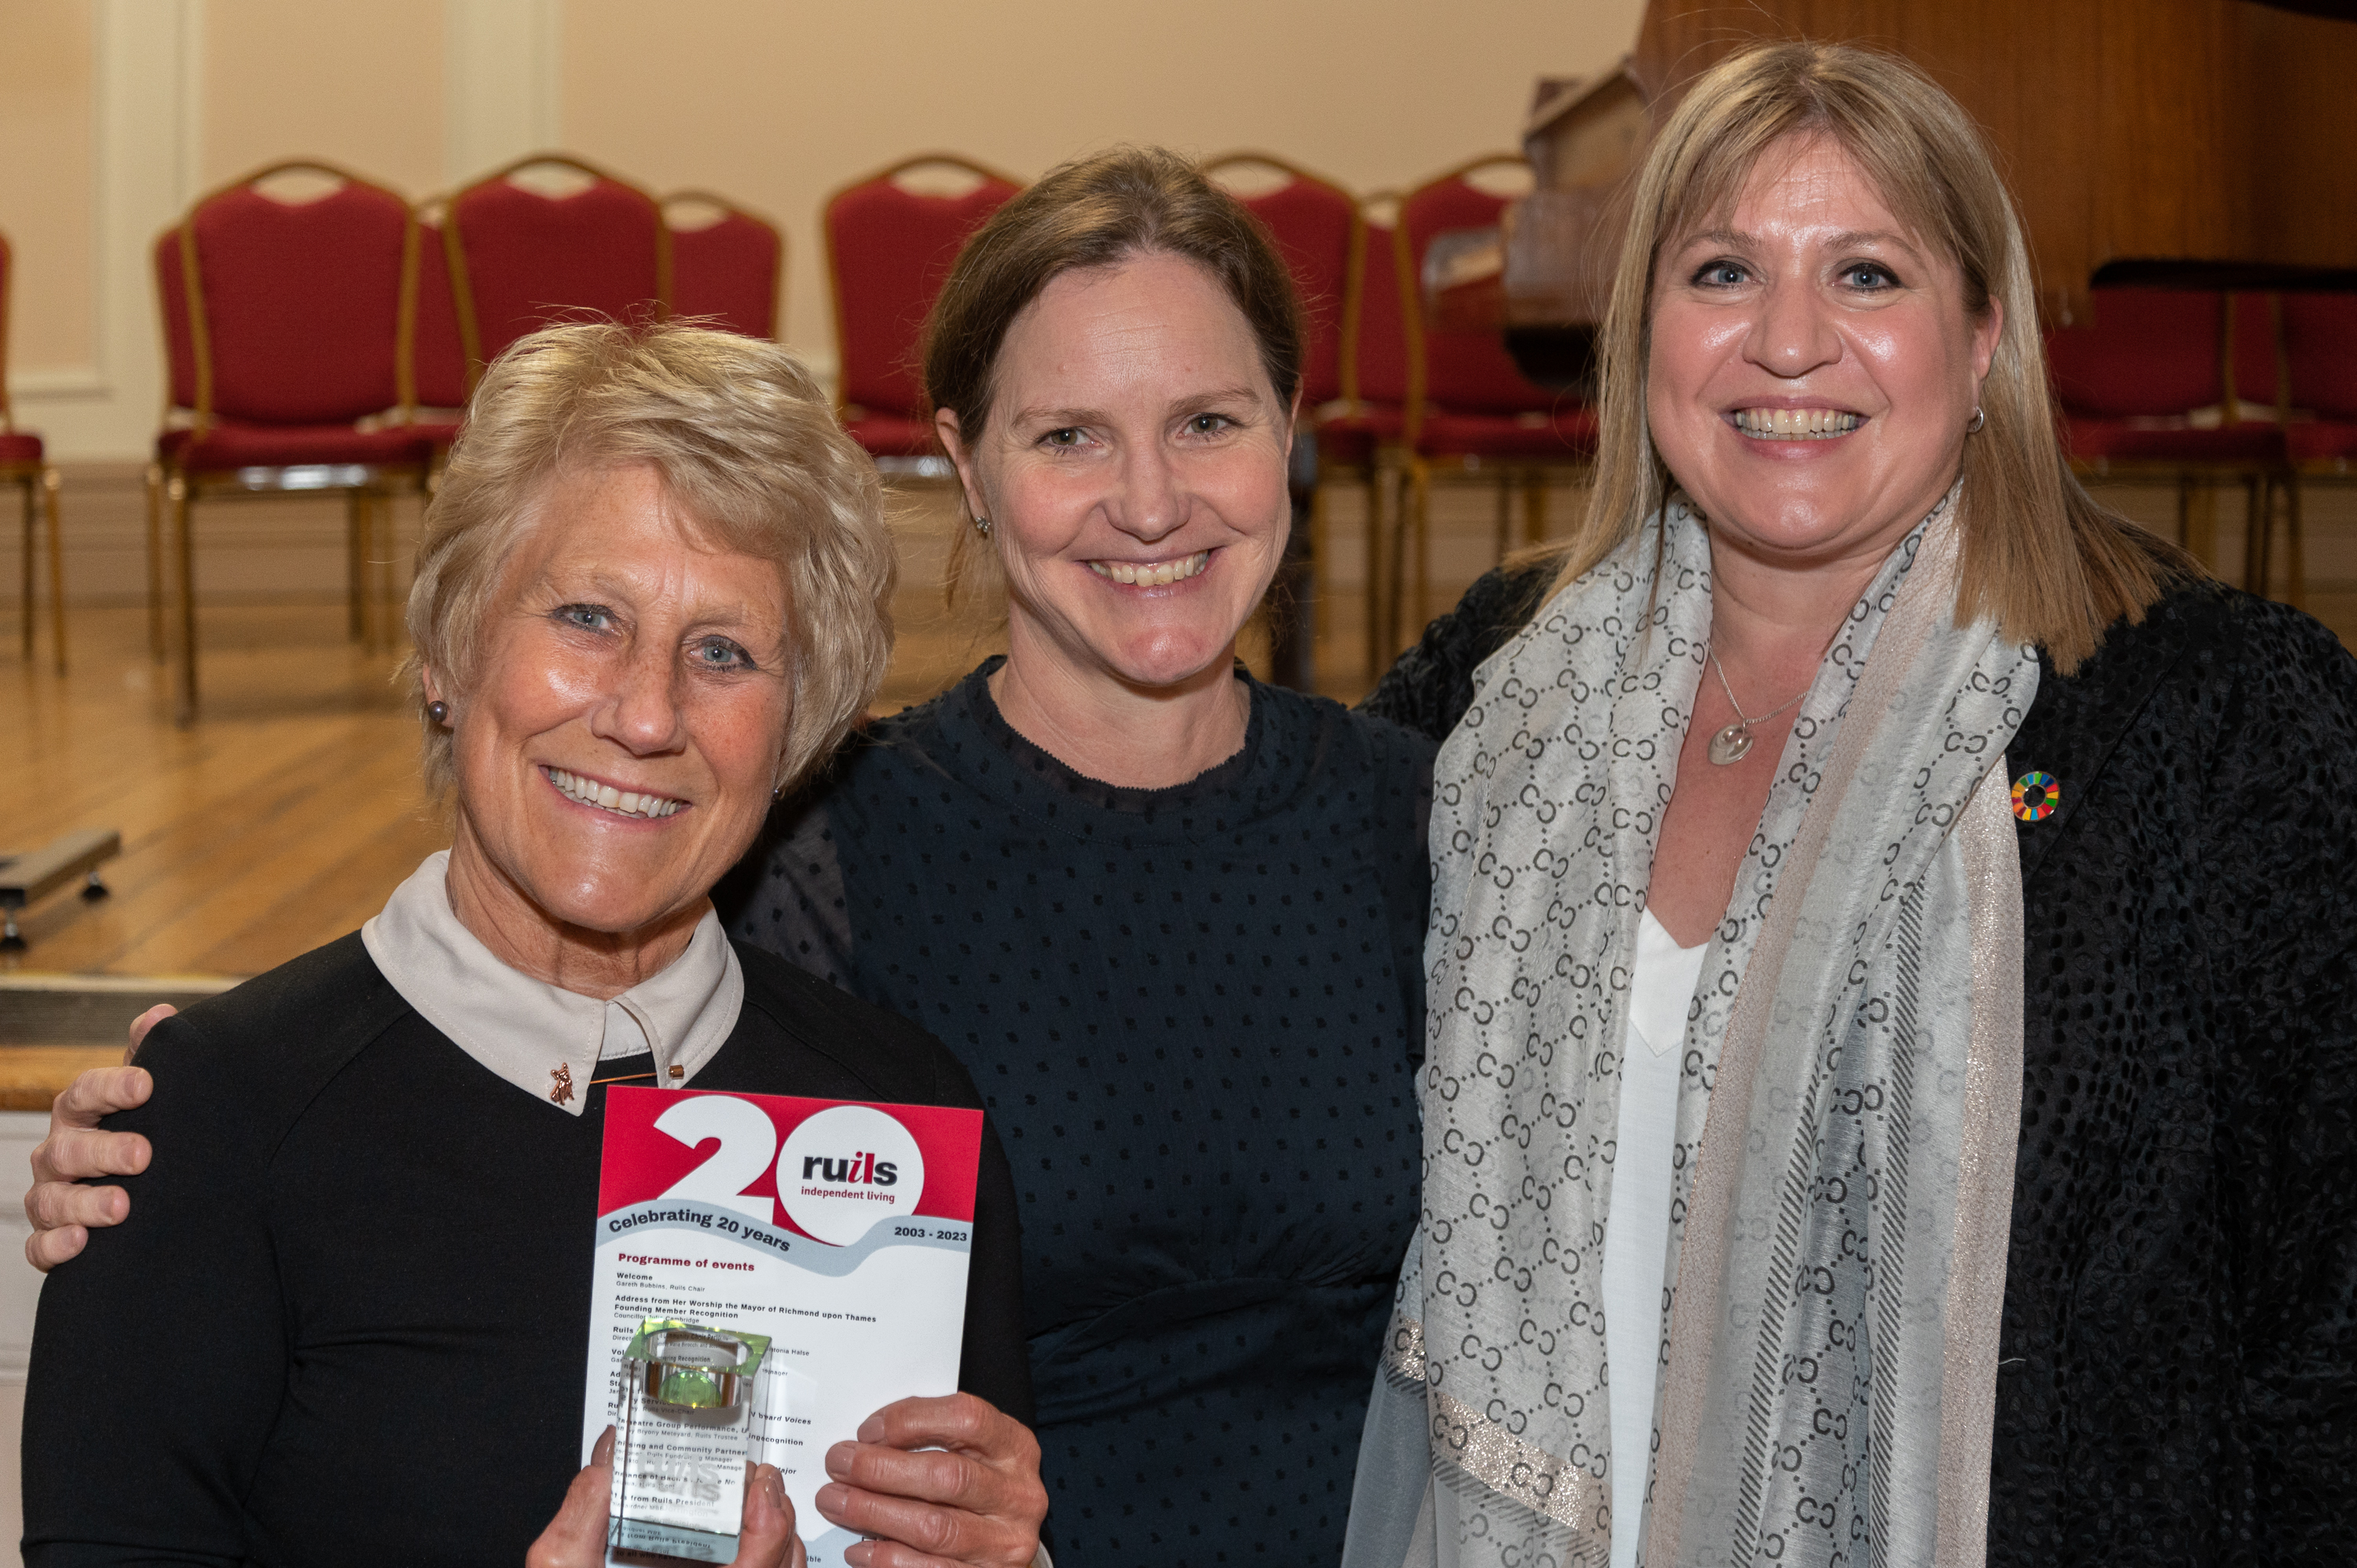 From left to right - Sue Dorrington, Cathy Maker and Charlie Bronks